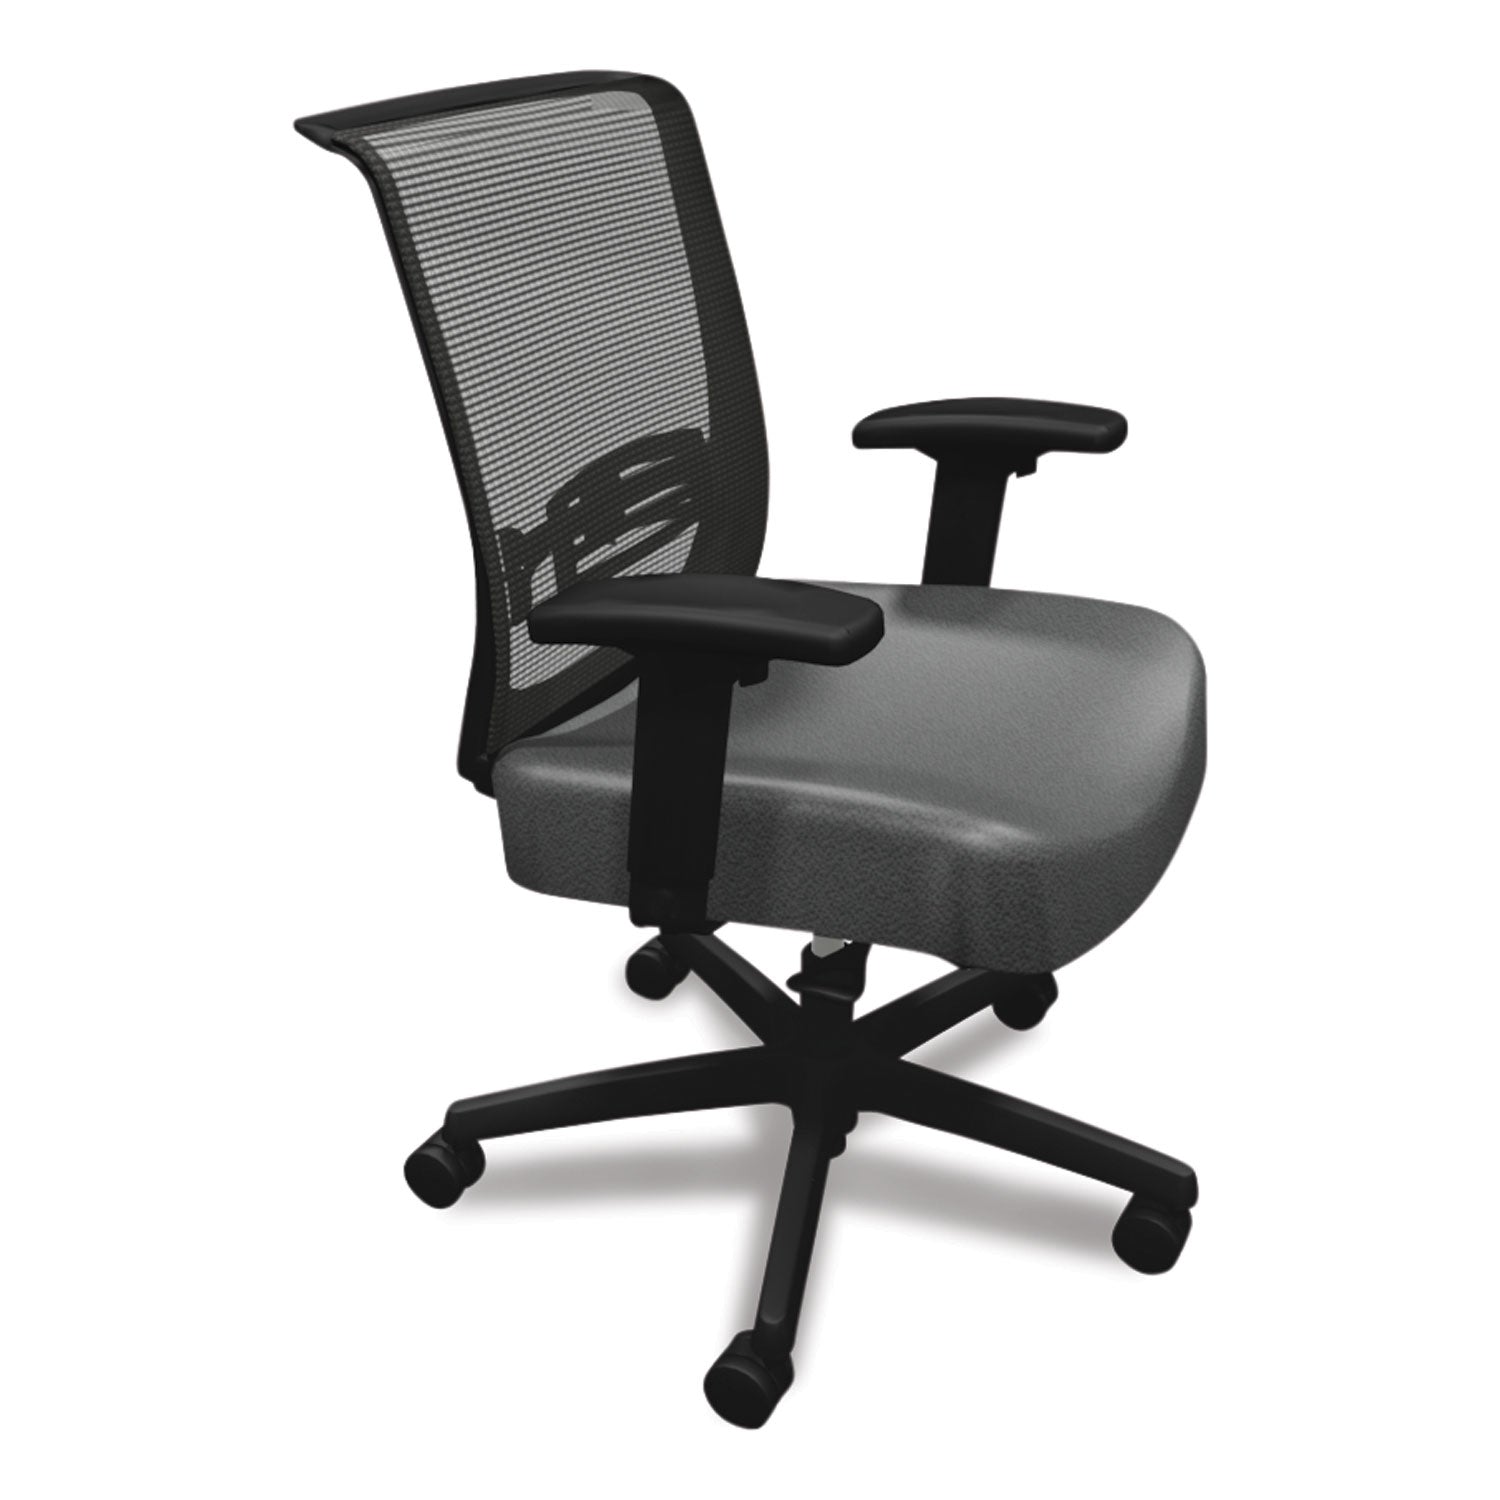 convergence-mid-back-task-chair-synchro-tilt-and-seat-glide-supports-up-to-275-lb-iron-ore-seat-black-back-base_honcmy1acu19 - 3